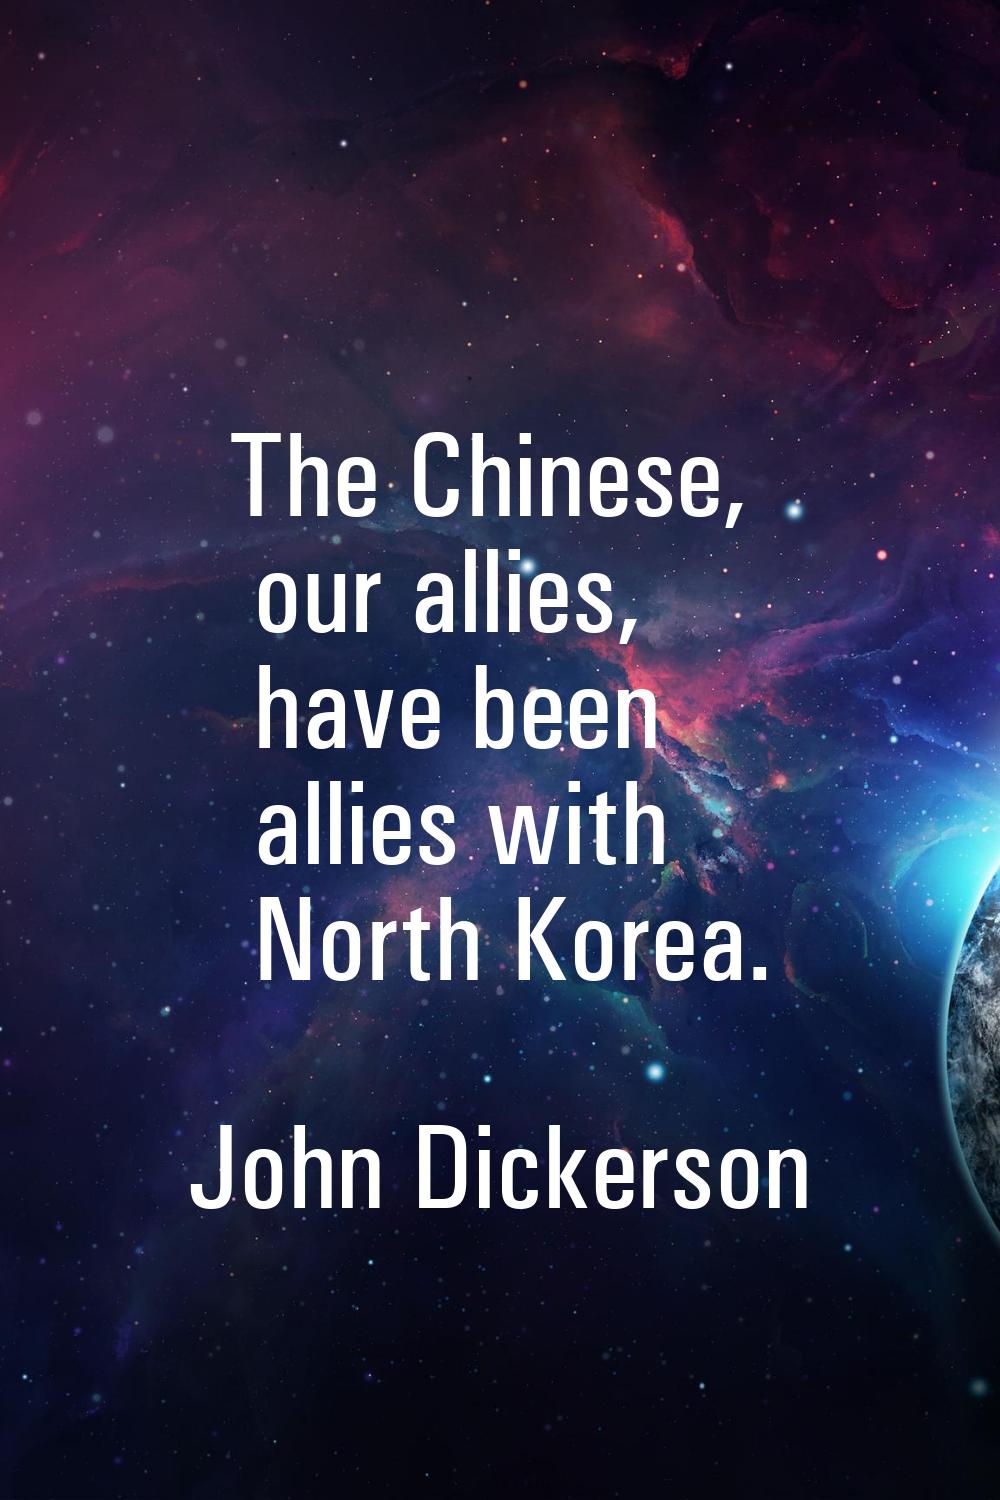 The Chinese, our allies, have been allies with North Korea.